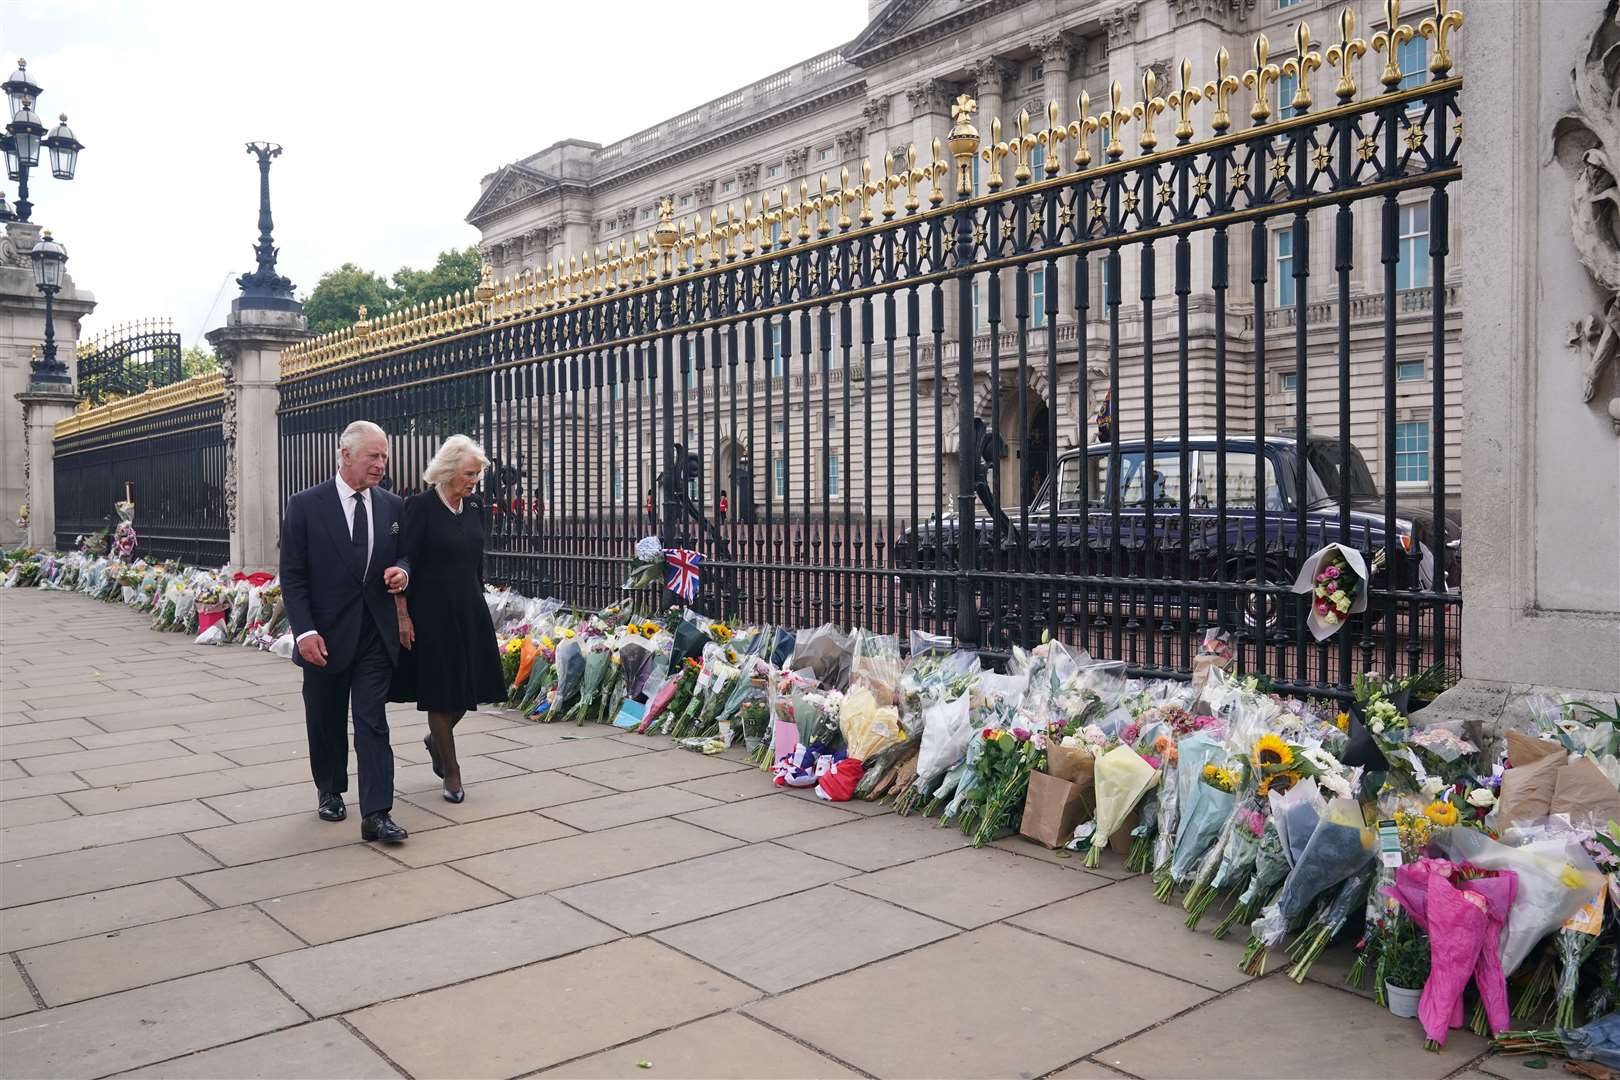 King Charles III and the Queen view tributes left outside Buckingham Palace (Yui Mok/PA)